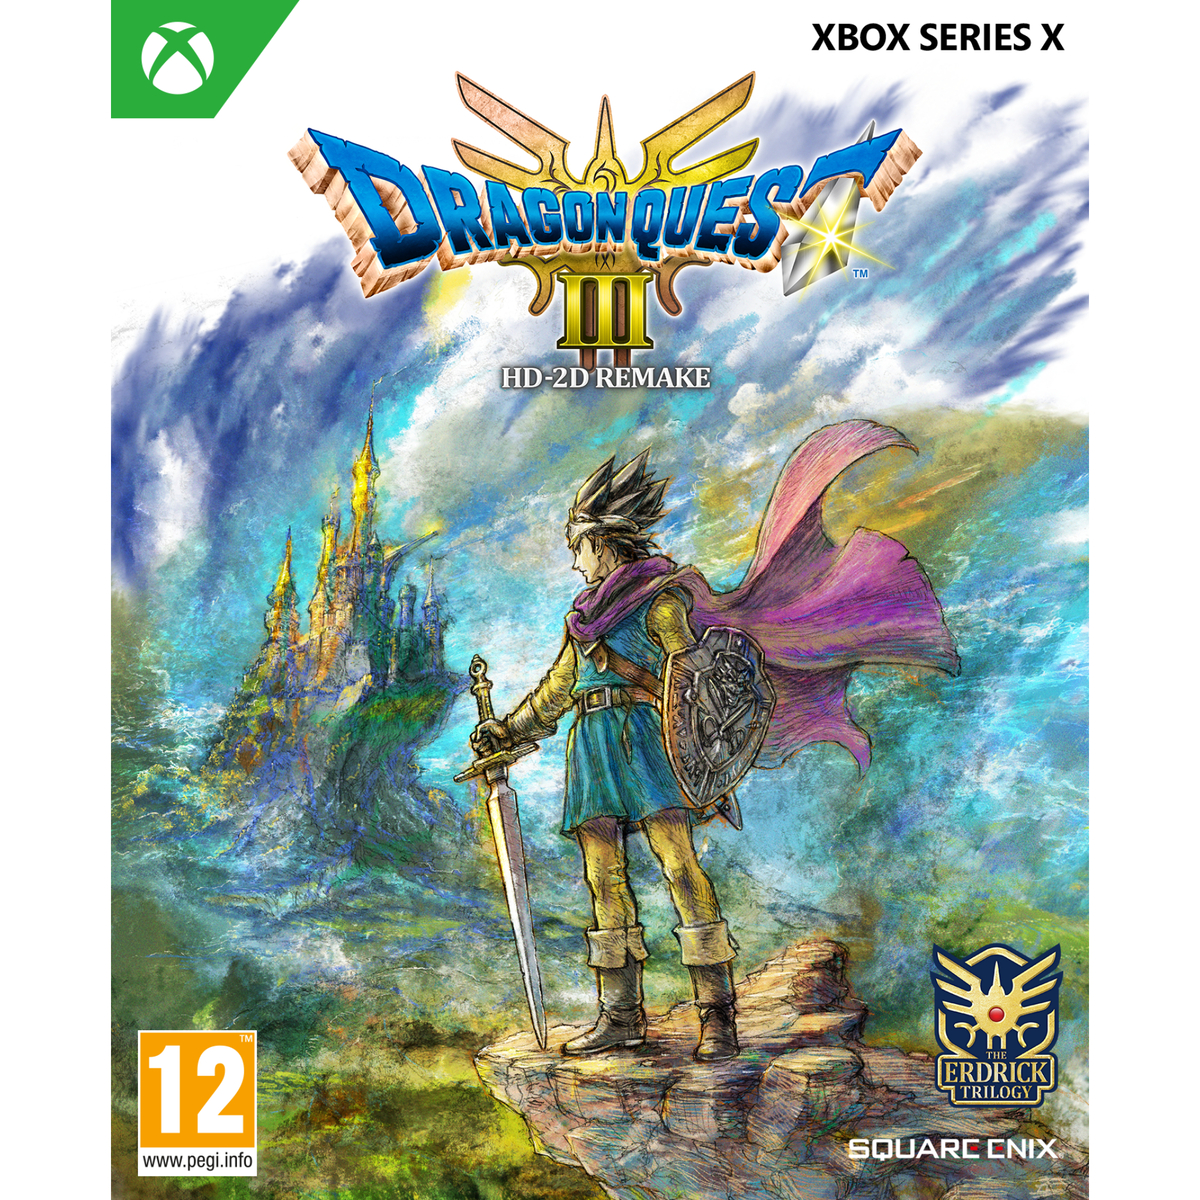 PRE-ORDER Dragon Quest III HD-2D Remake for Xbox